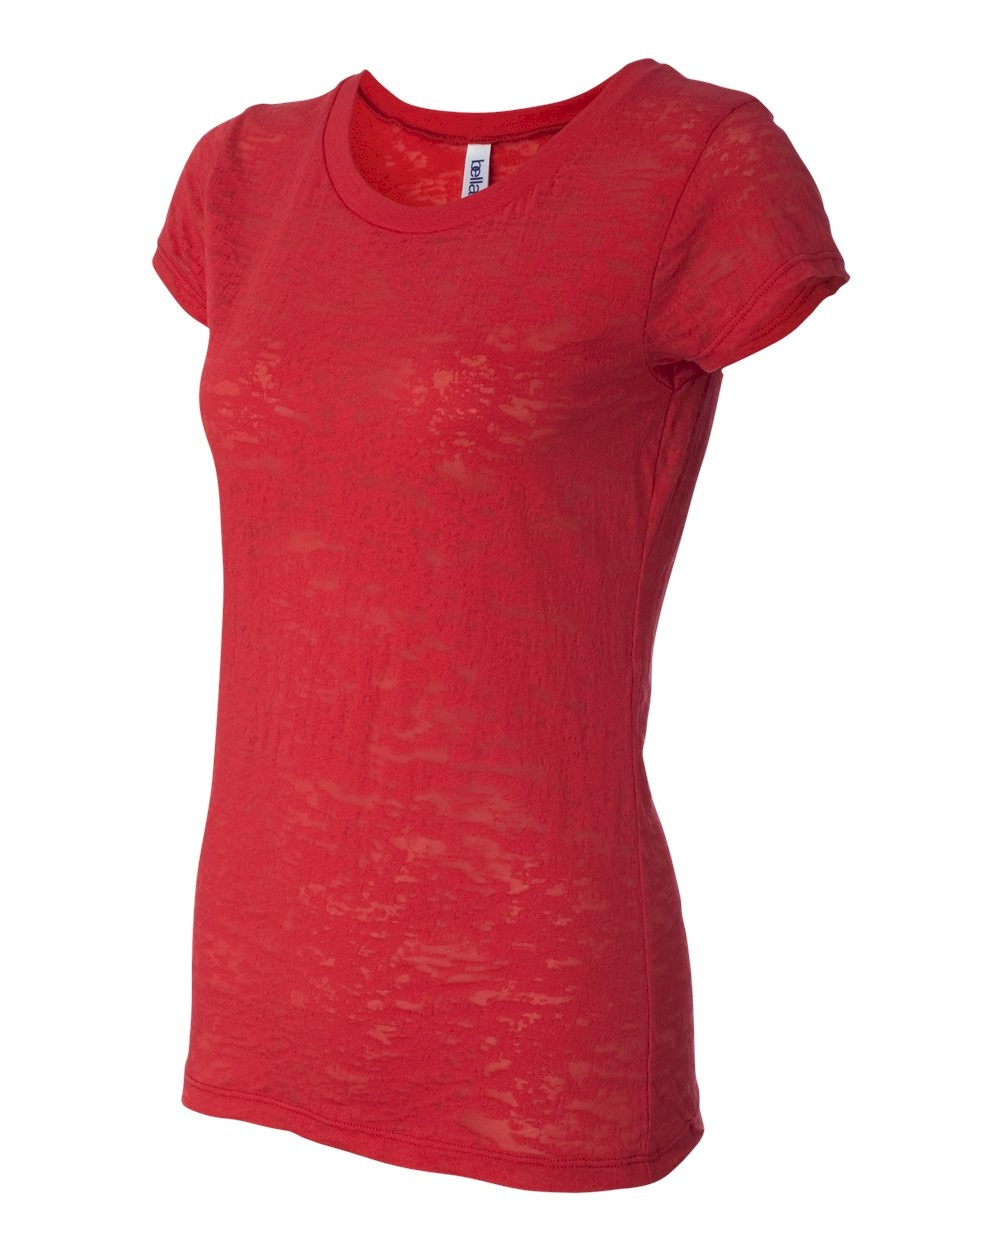 Bella + Canvas Ladies' Burnout T-Shirt Embroidery Blanks - RED